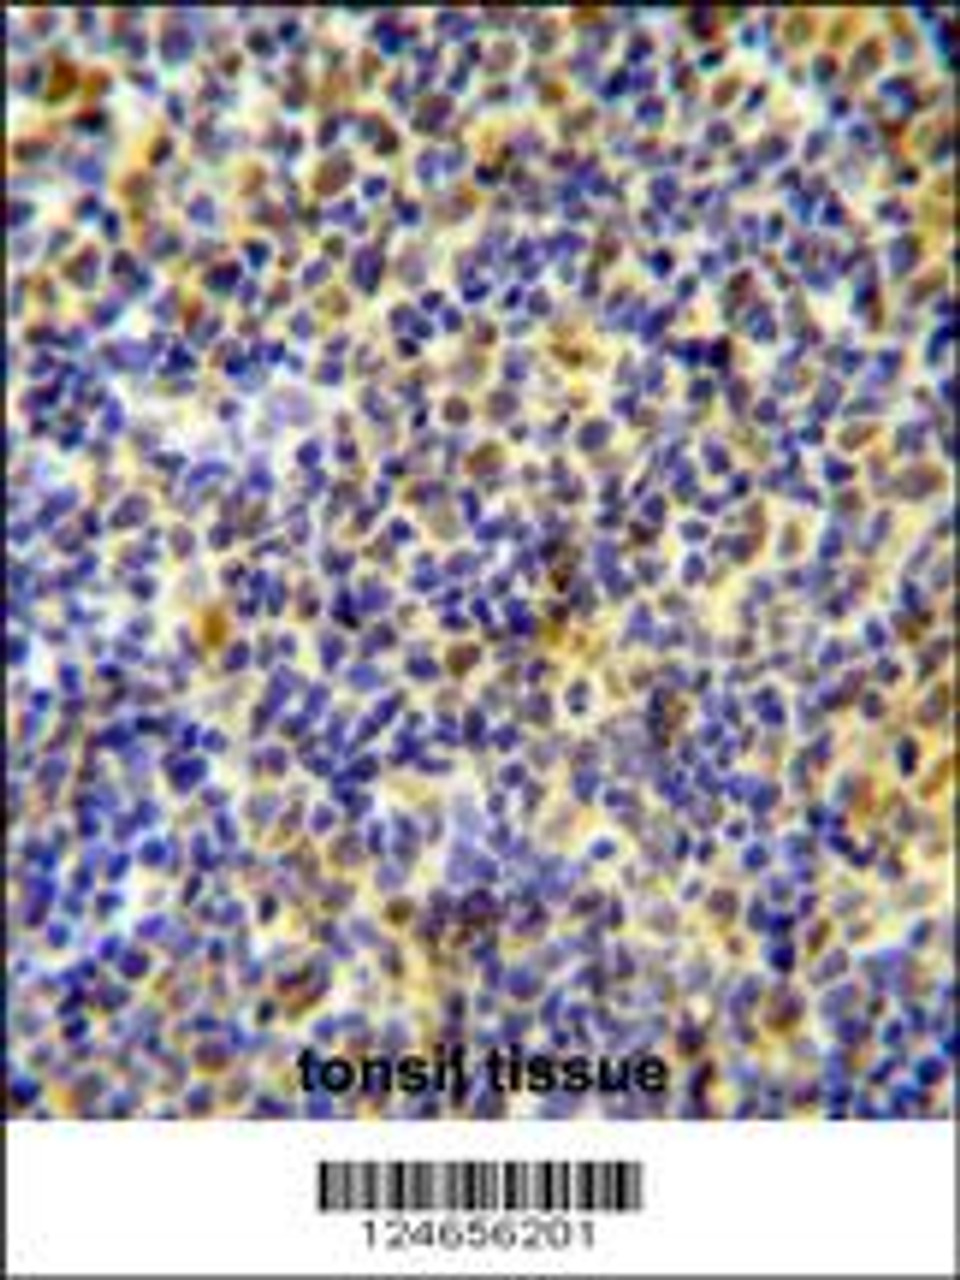 IKZF1 Antibody immunohistochemistry analysis in formalin fixed and paraffin embedded human tonsil tissue followed by peroxidase conjugation of the secondary antibody and DAB staining.